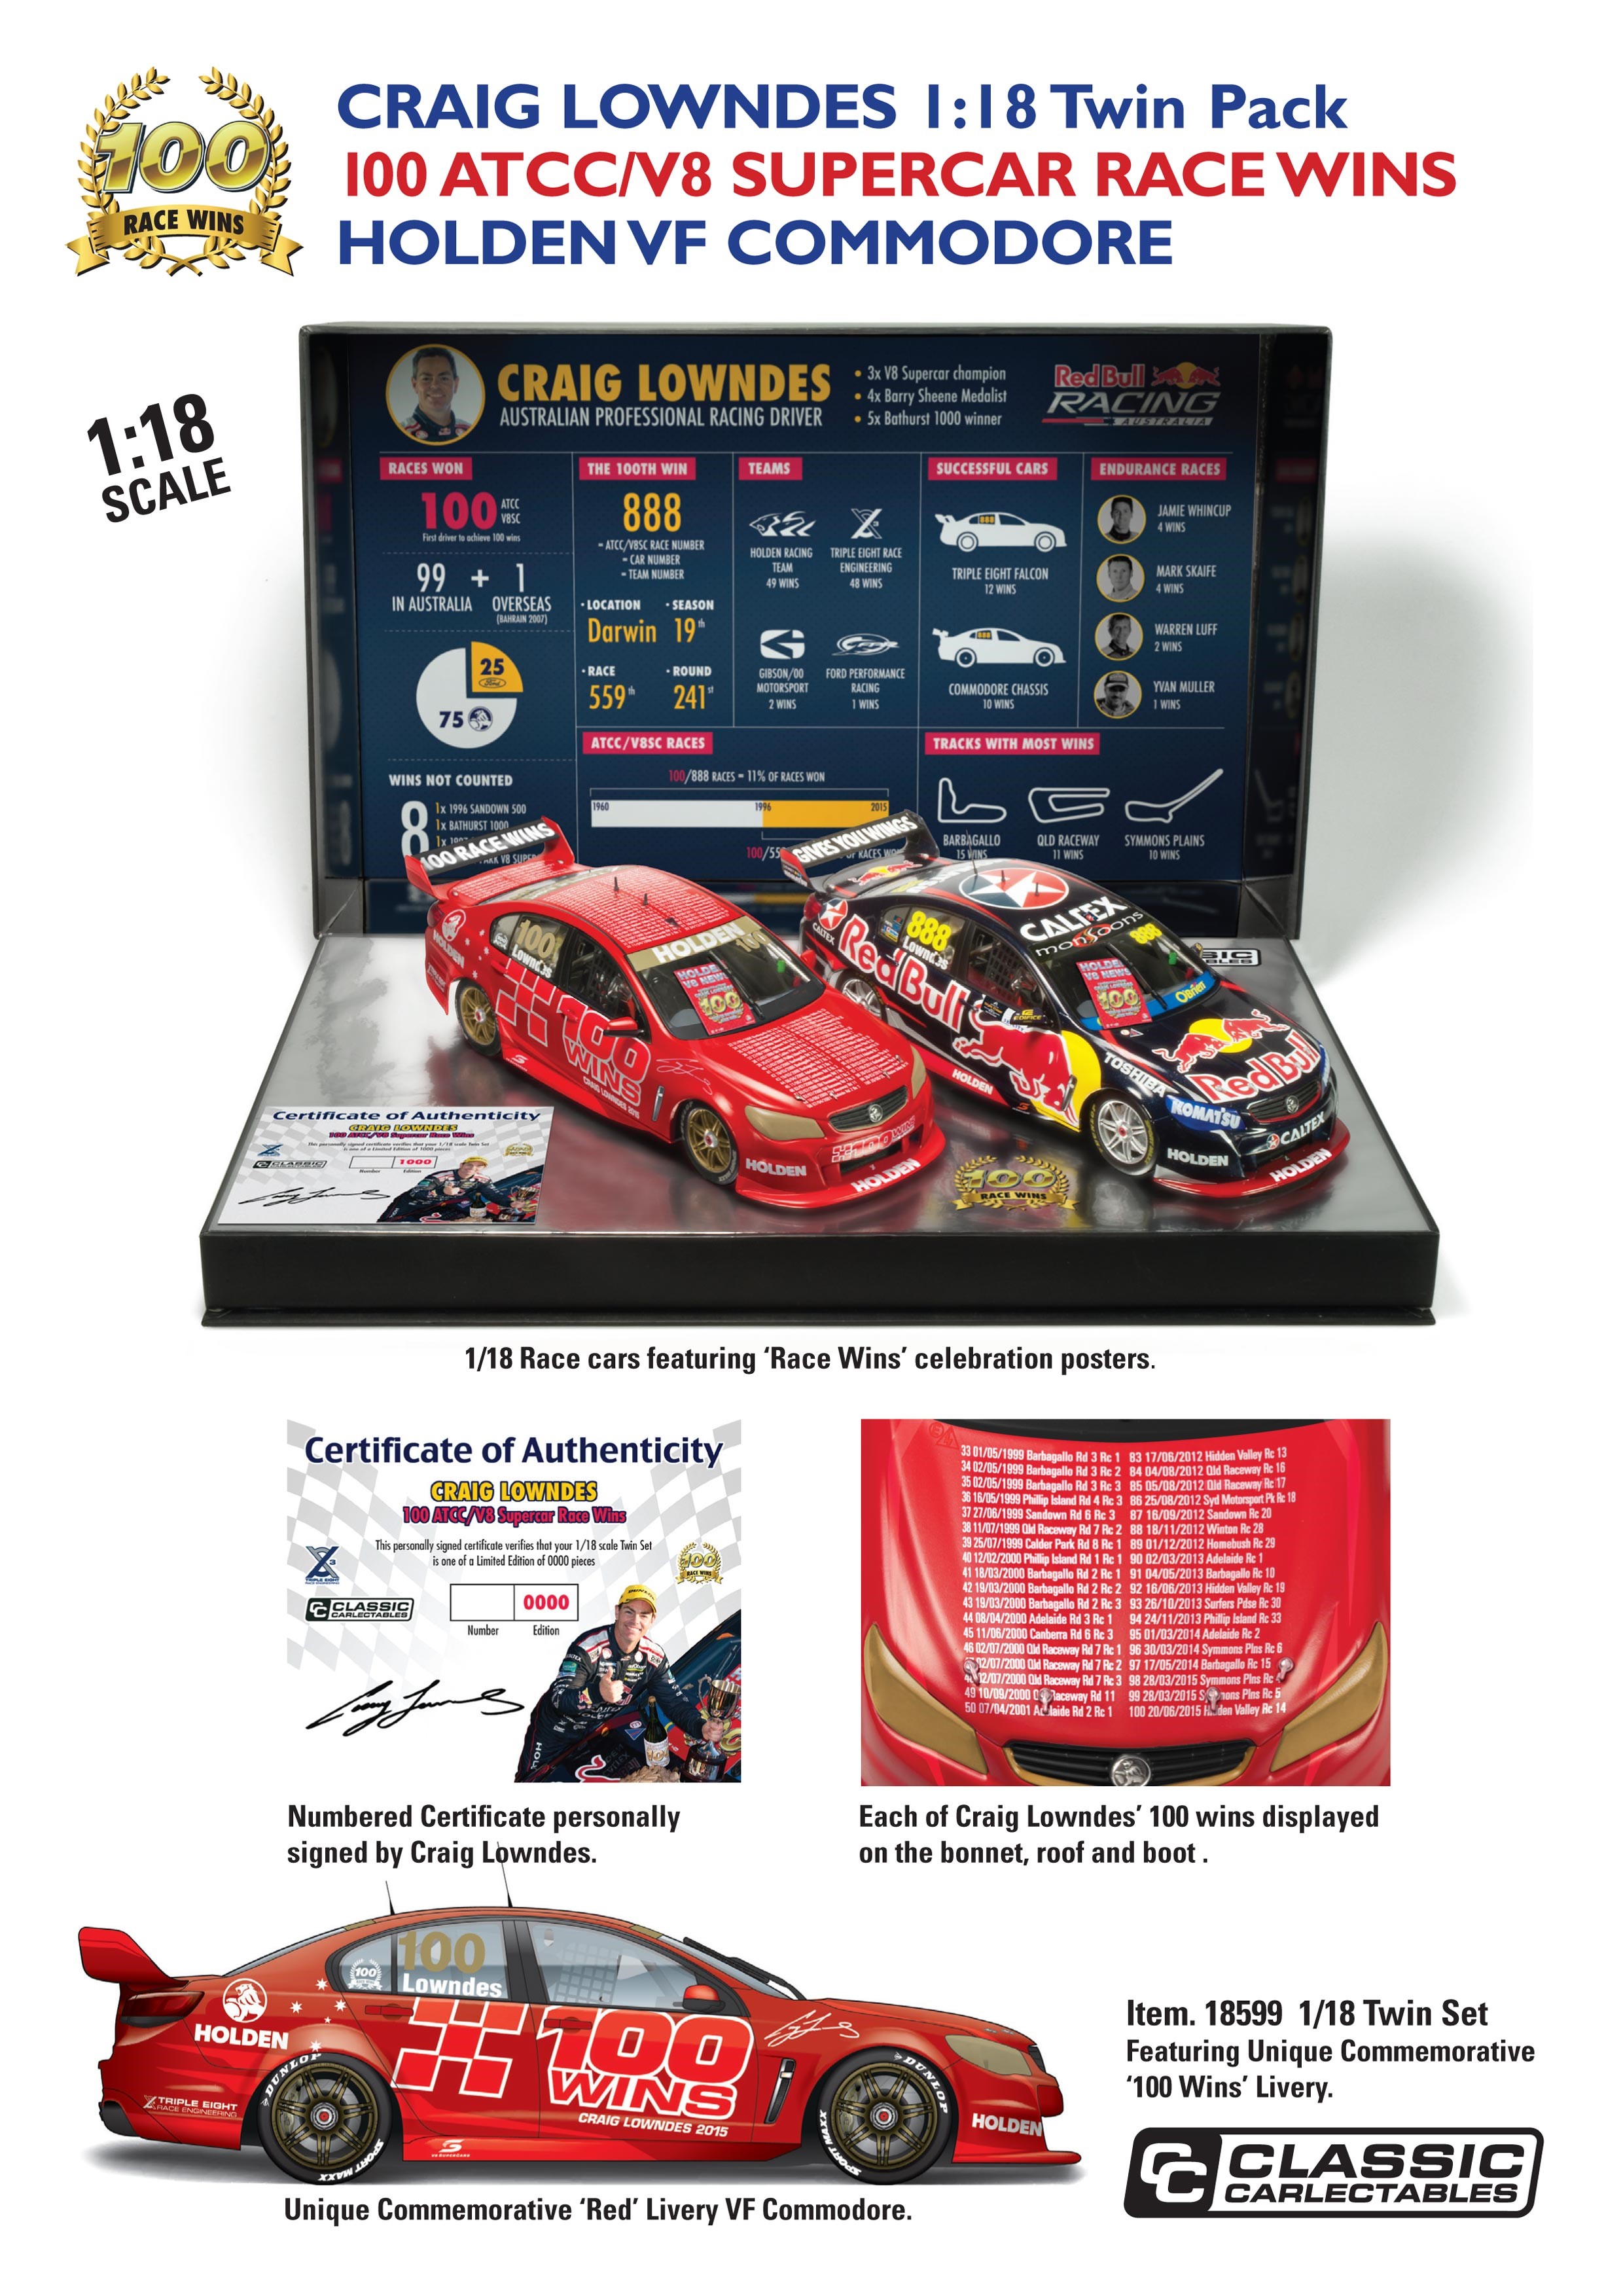 Lowndes 100 Race Wins Twin Pack